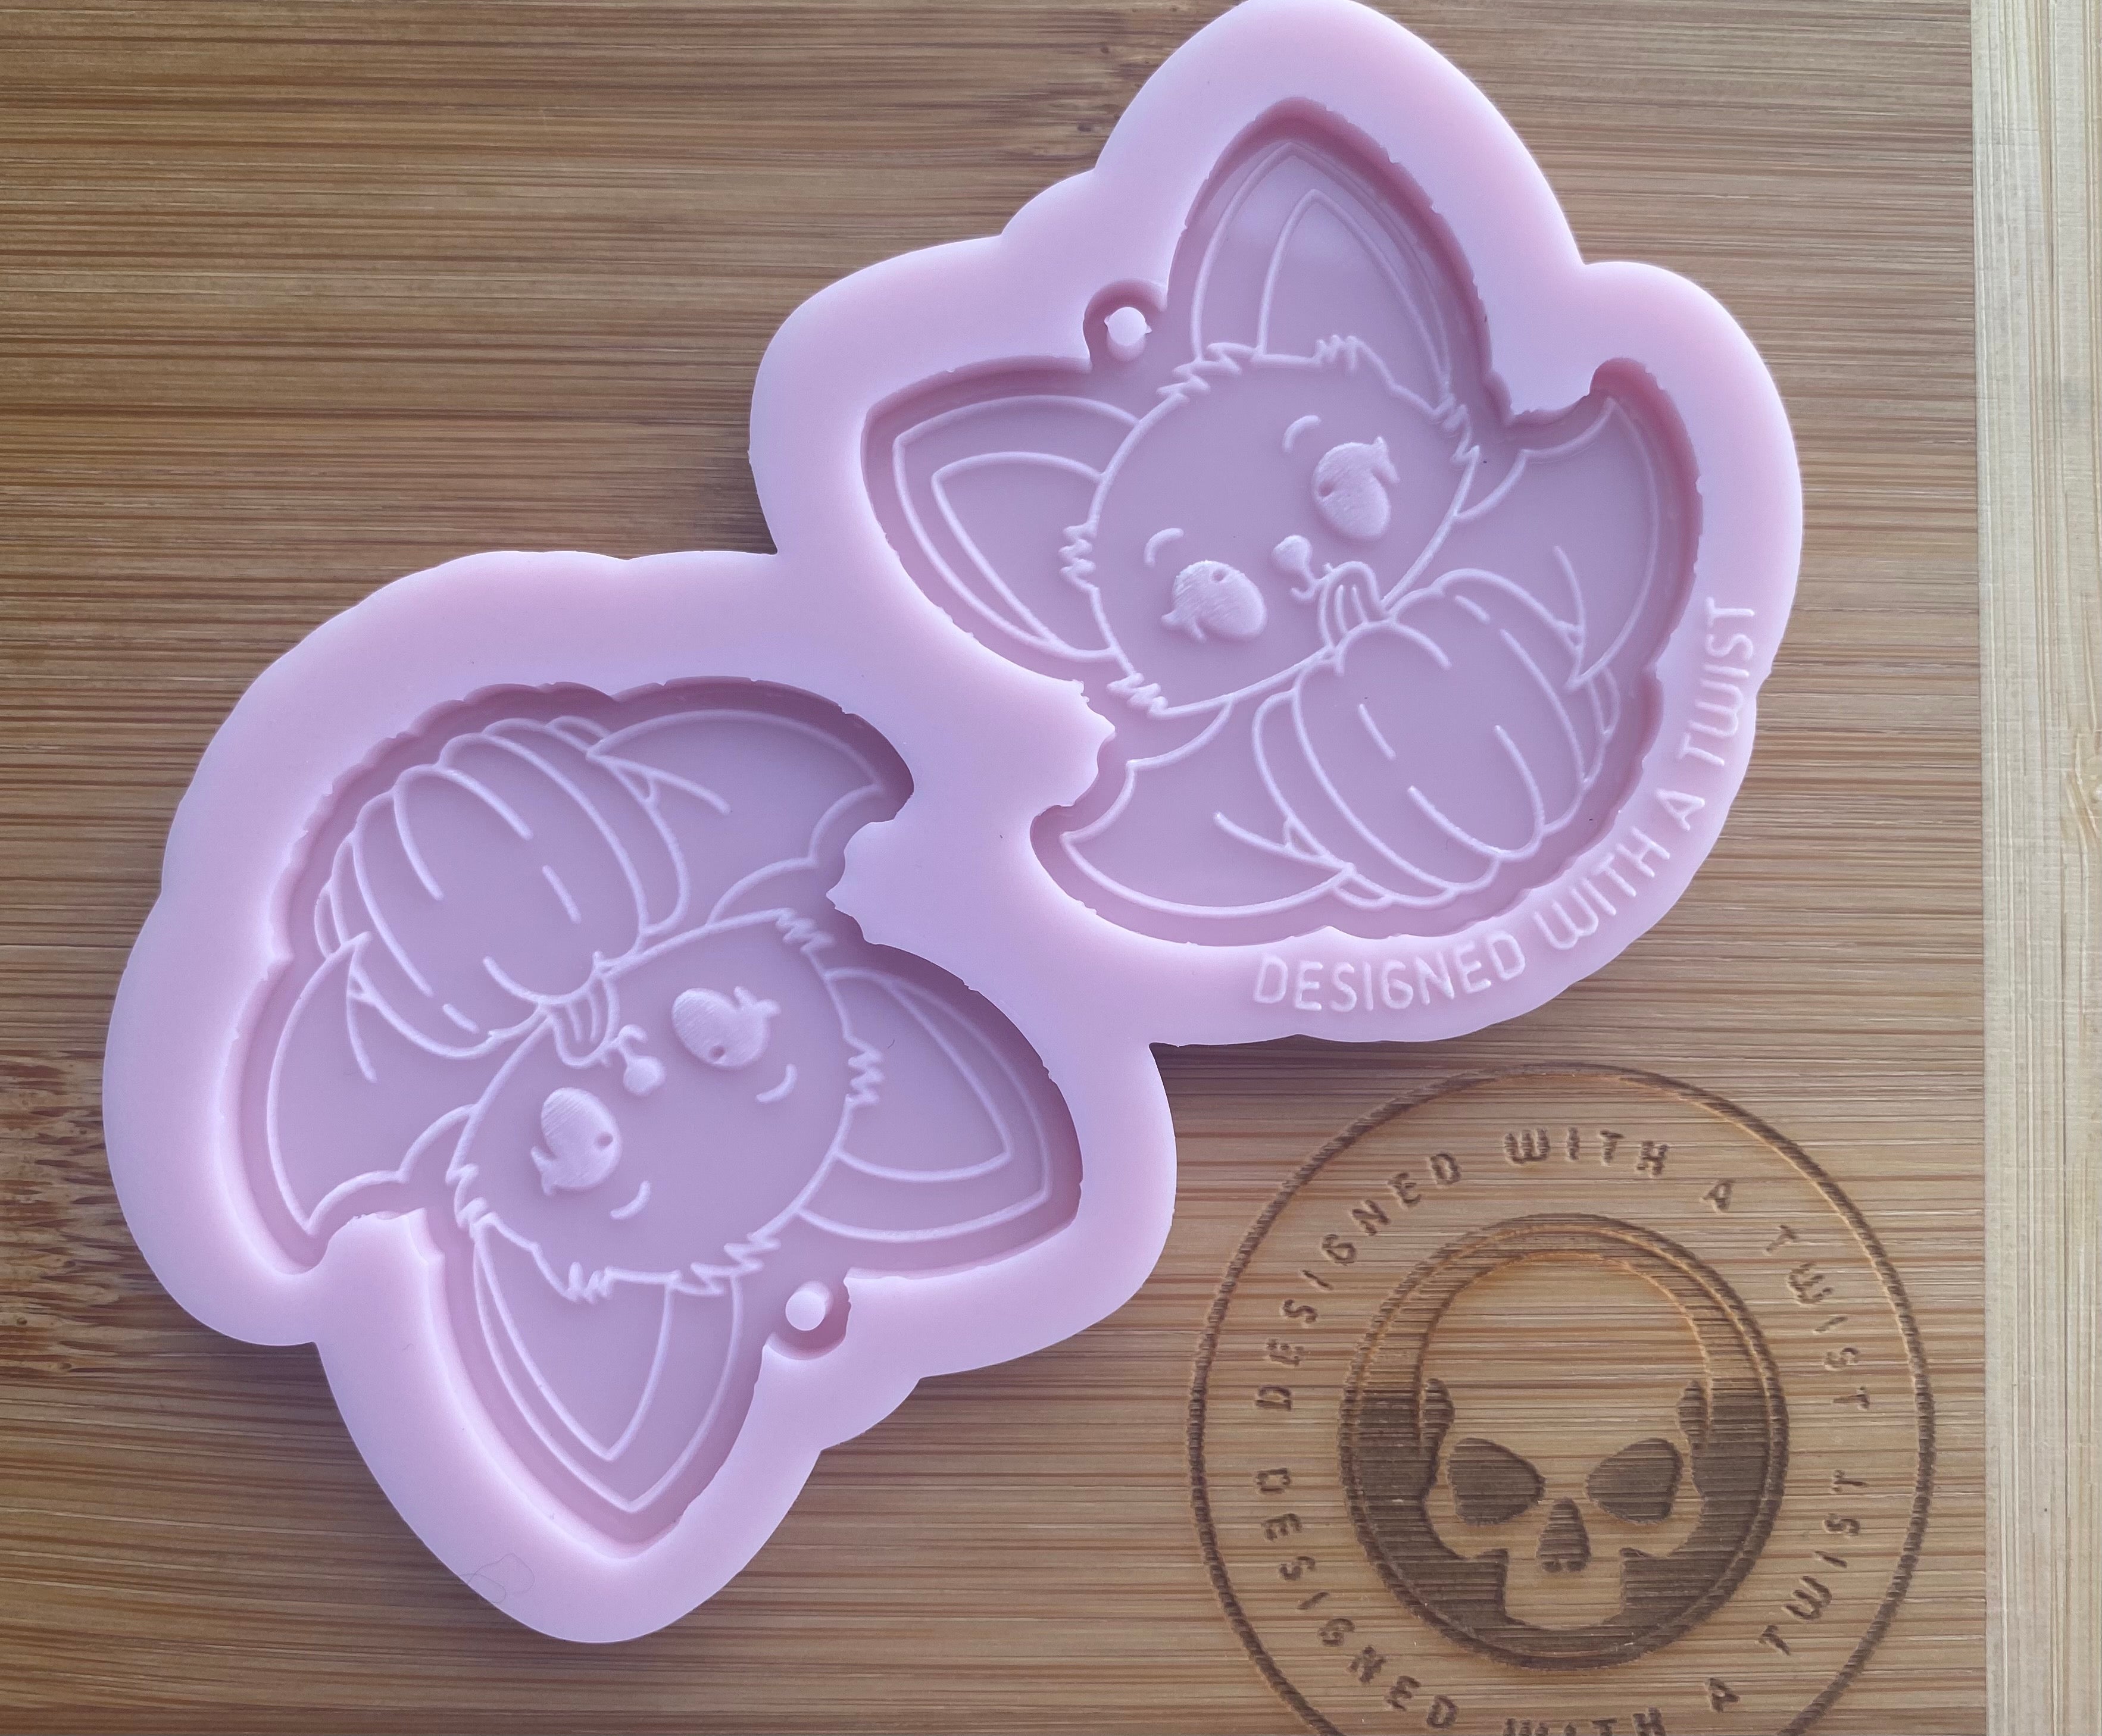 Earring & Jewellery Moulds - Designed with a Twist  - Top quality silicone molds made in the UK.